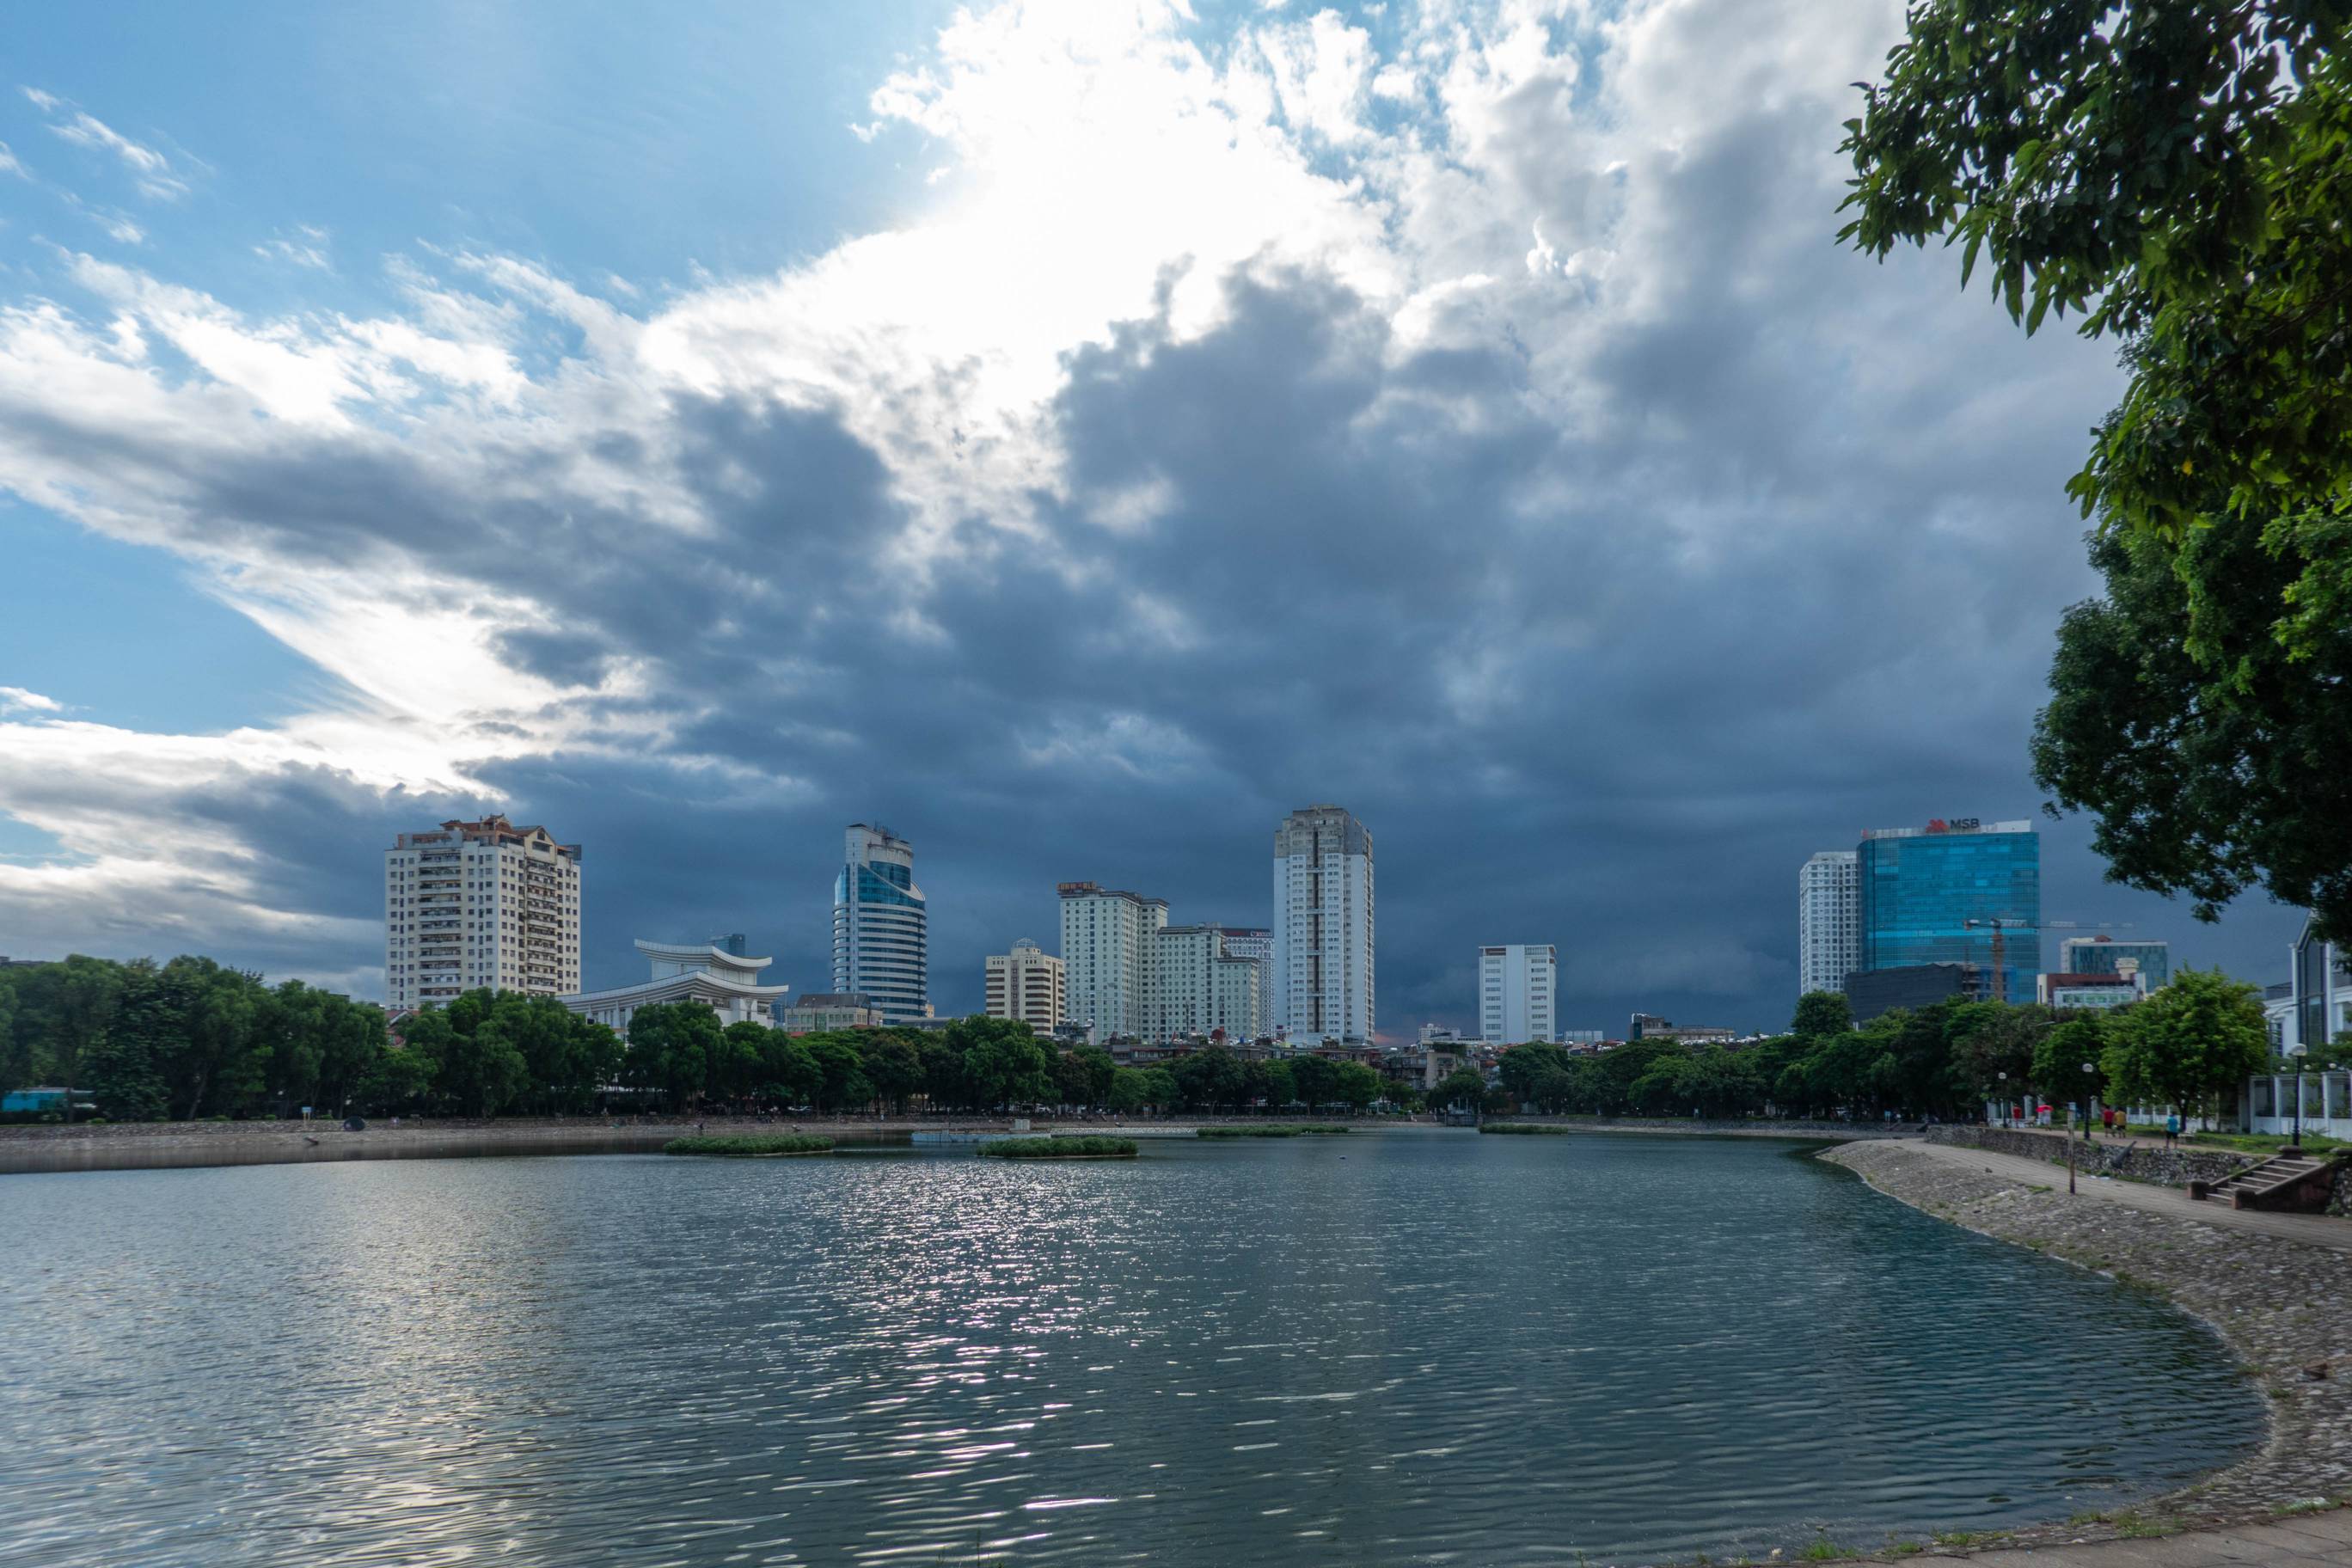 picture of lake with tall buildings on far side of lake and dense rainclouds moving in over buildings toward lake.